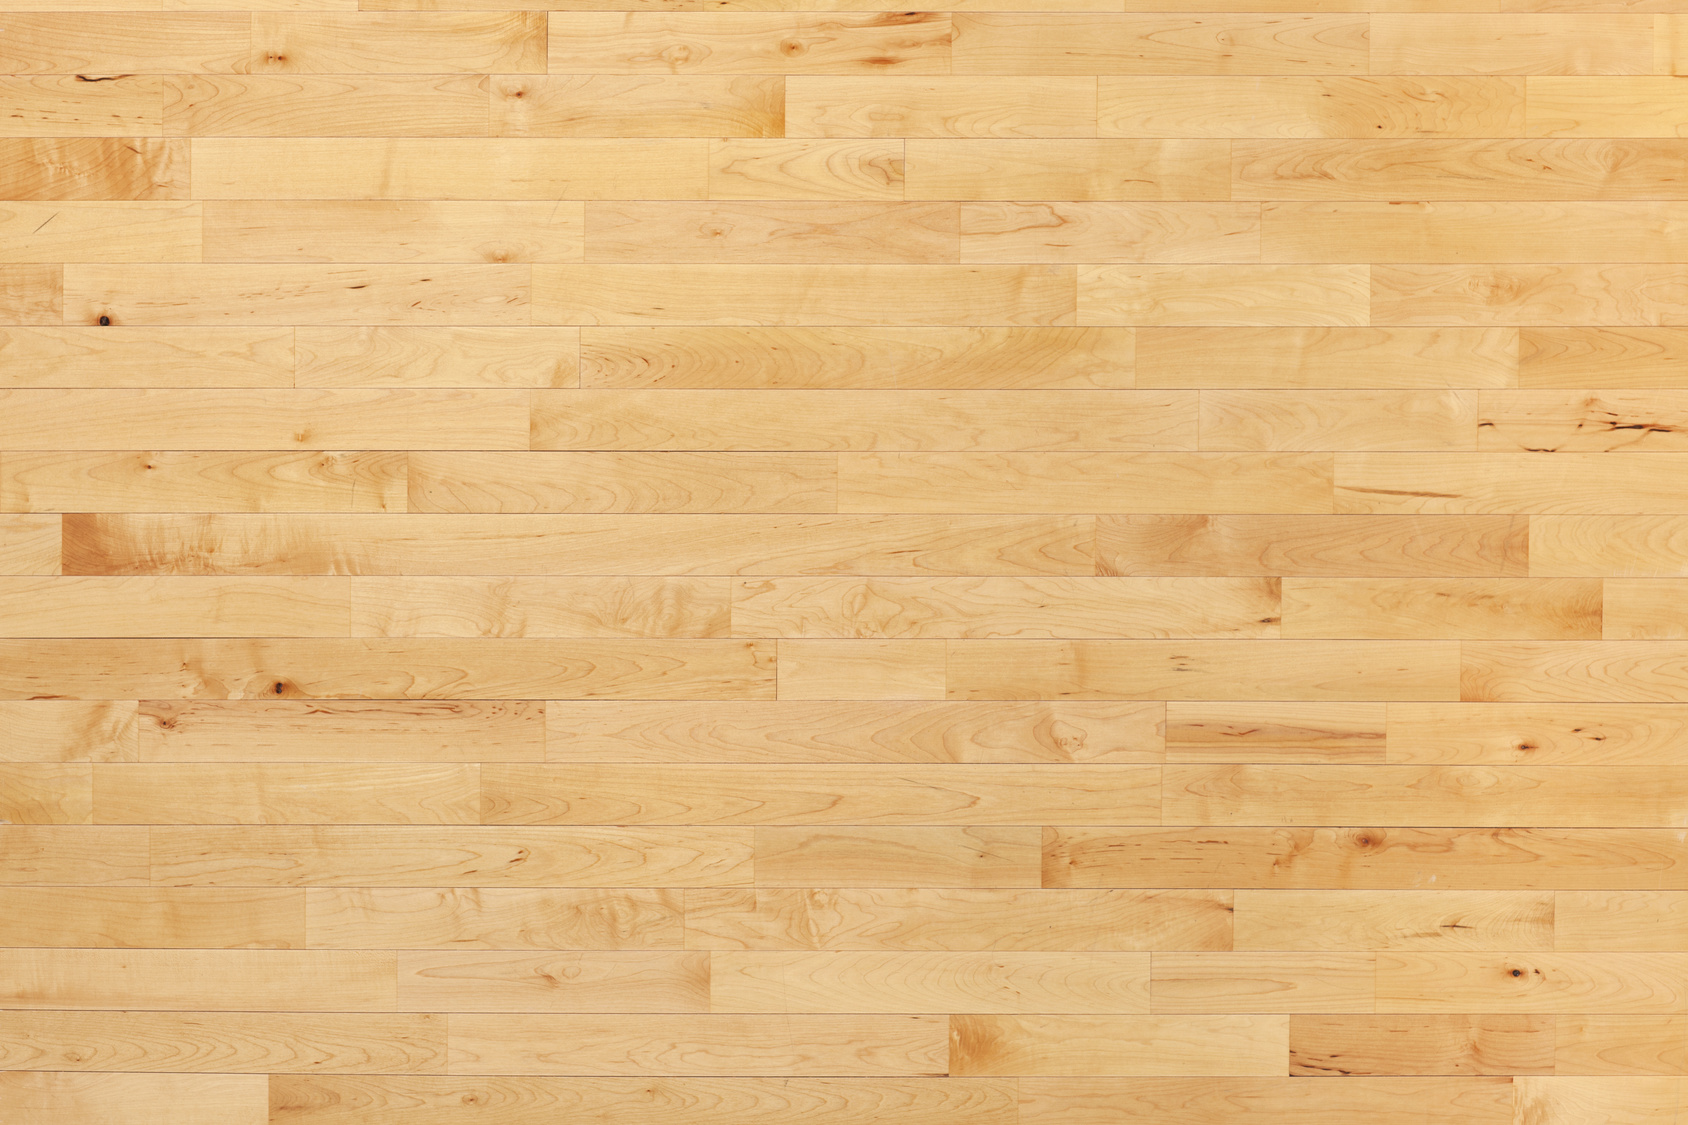 Hardwood basketball court floor viewed from above My Affordable Flooring